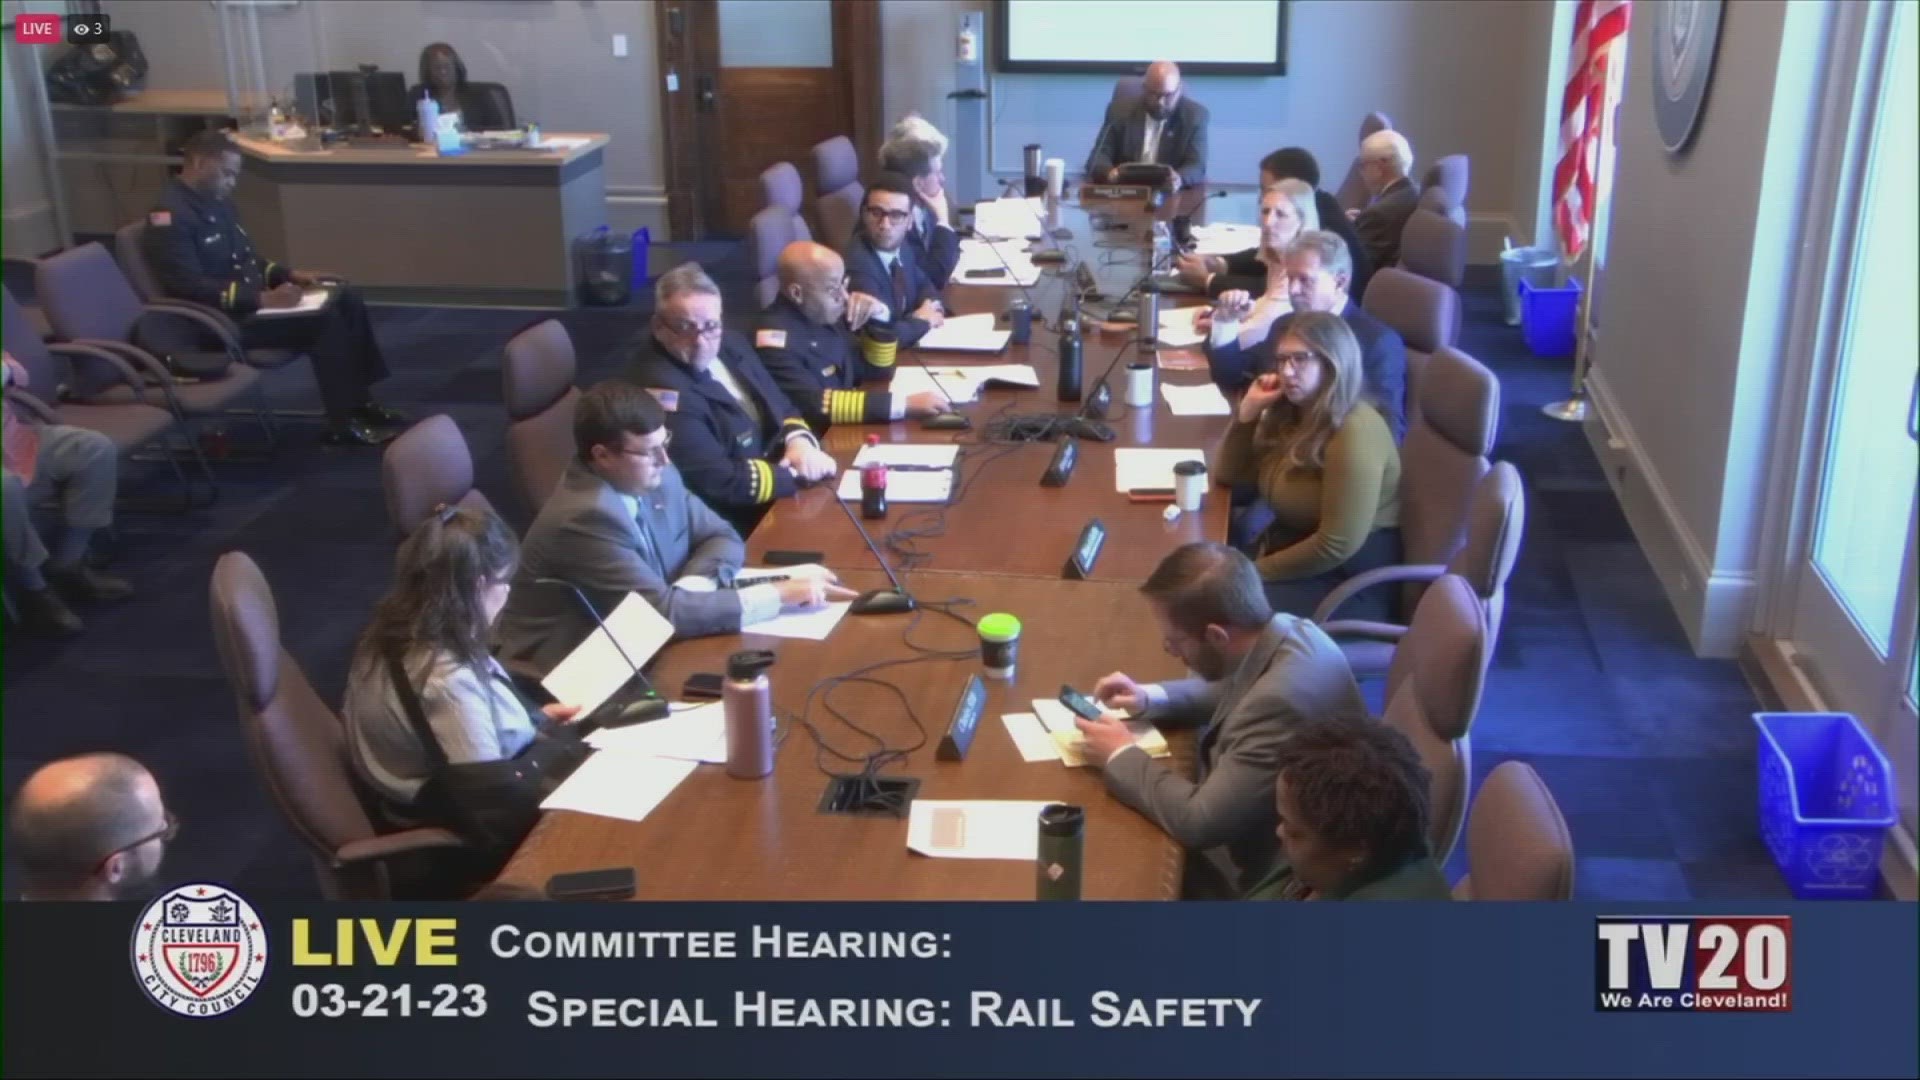 Cleveland City Council hosted an informational hearing regarding rail safety after new legislation was encouraged by council members.